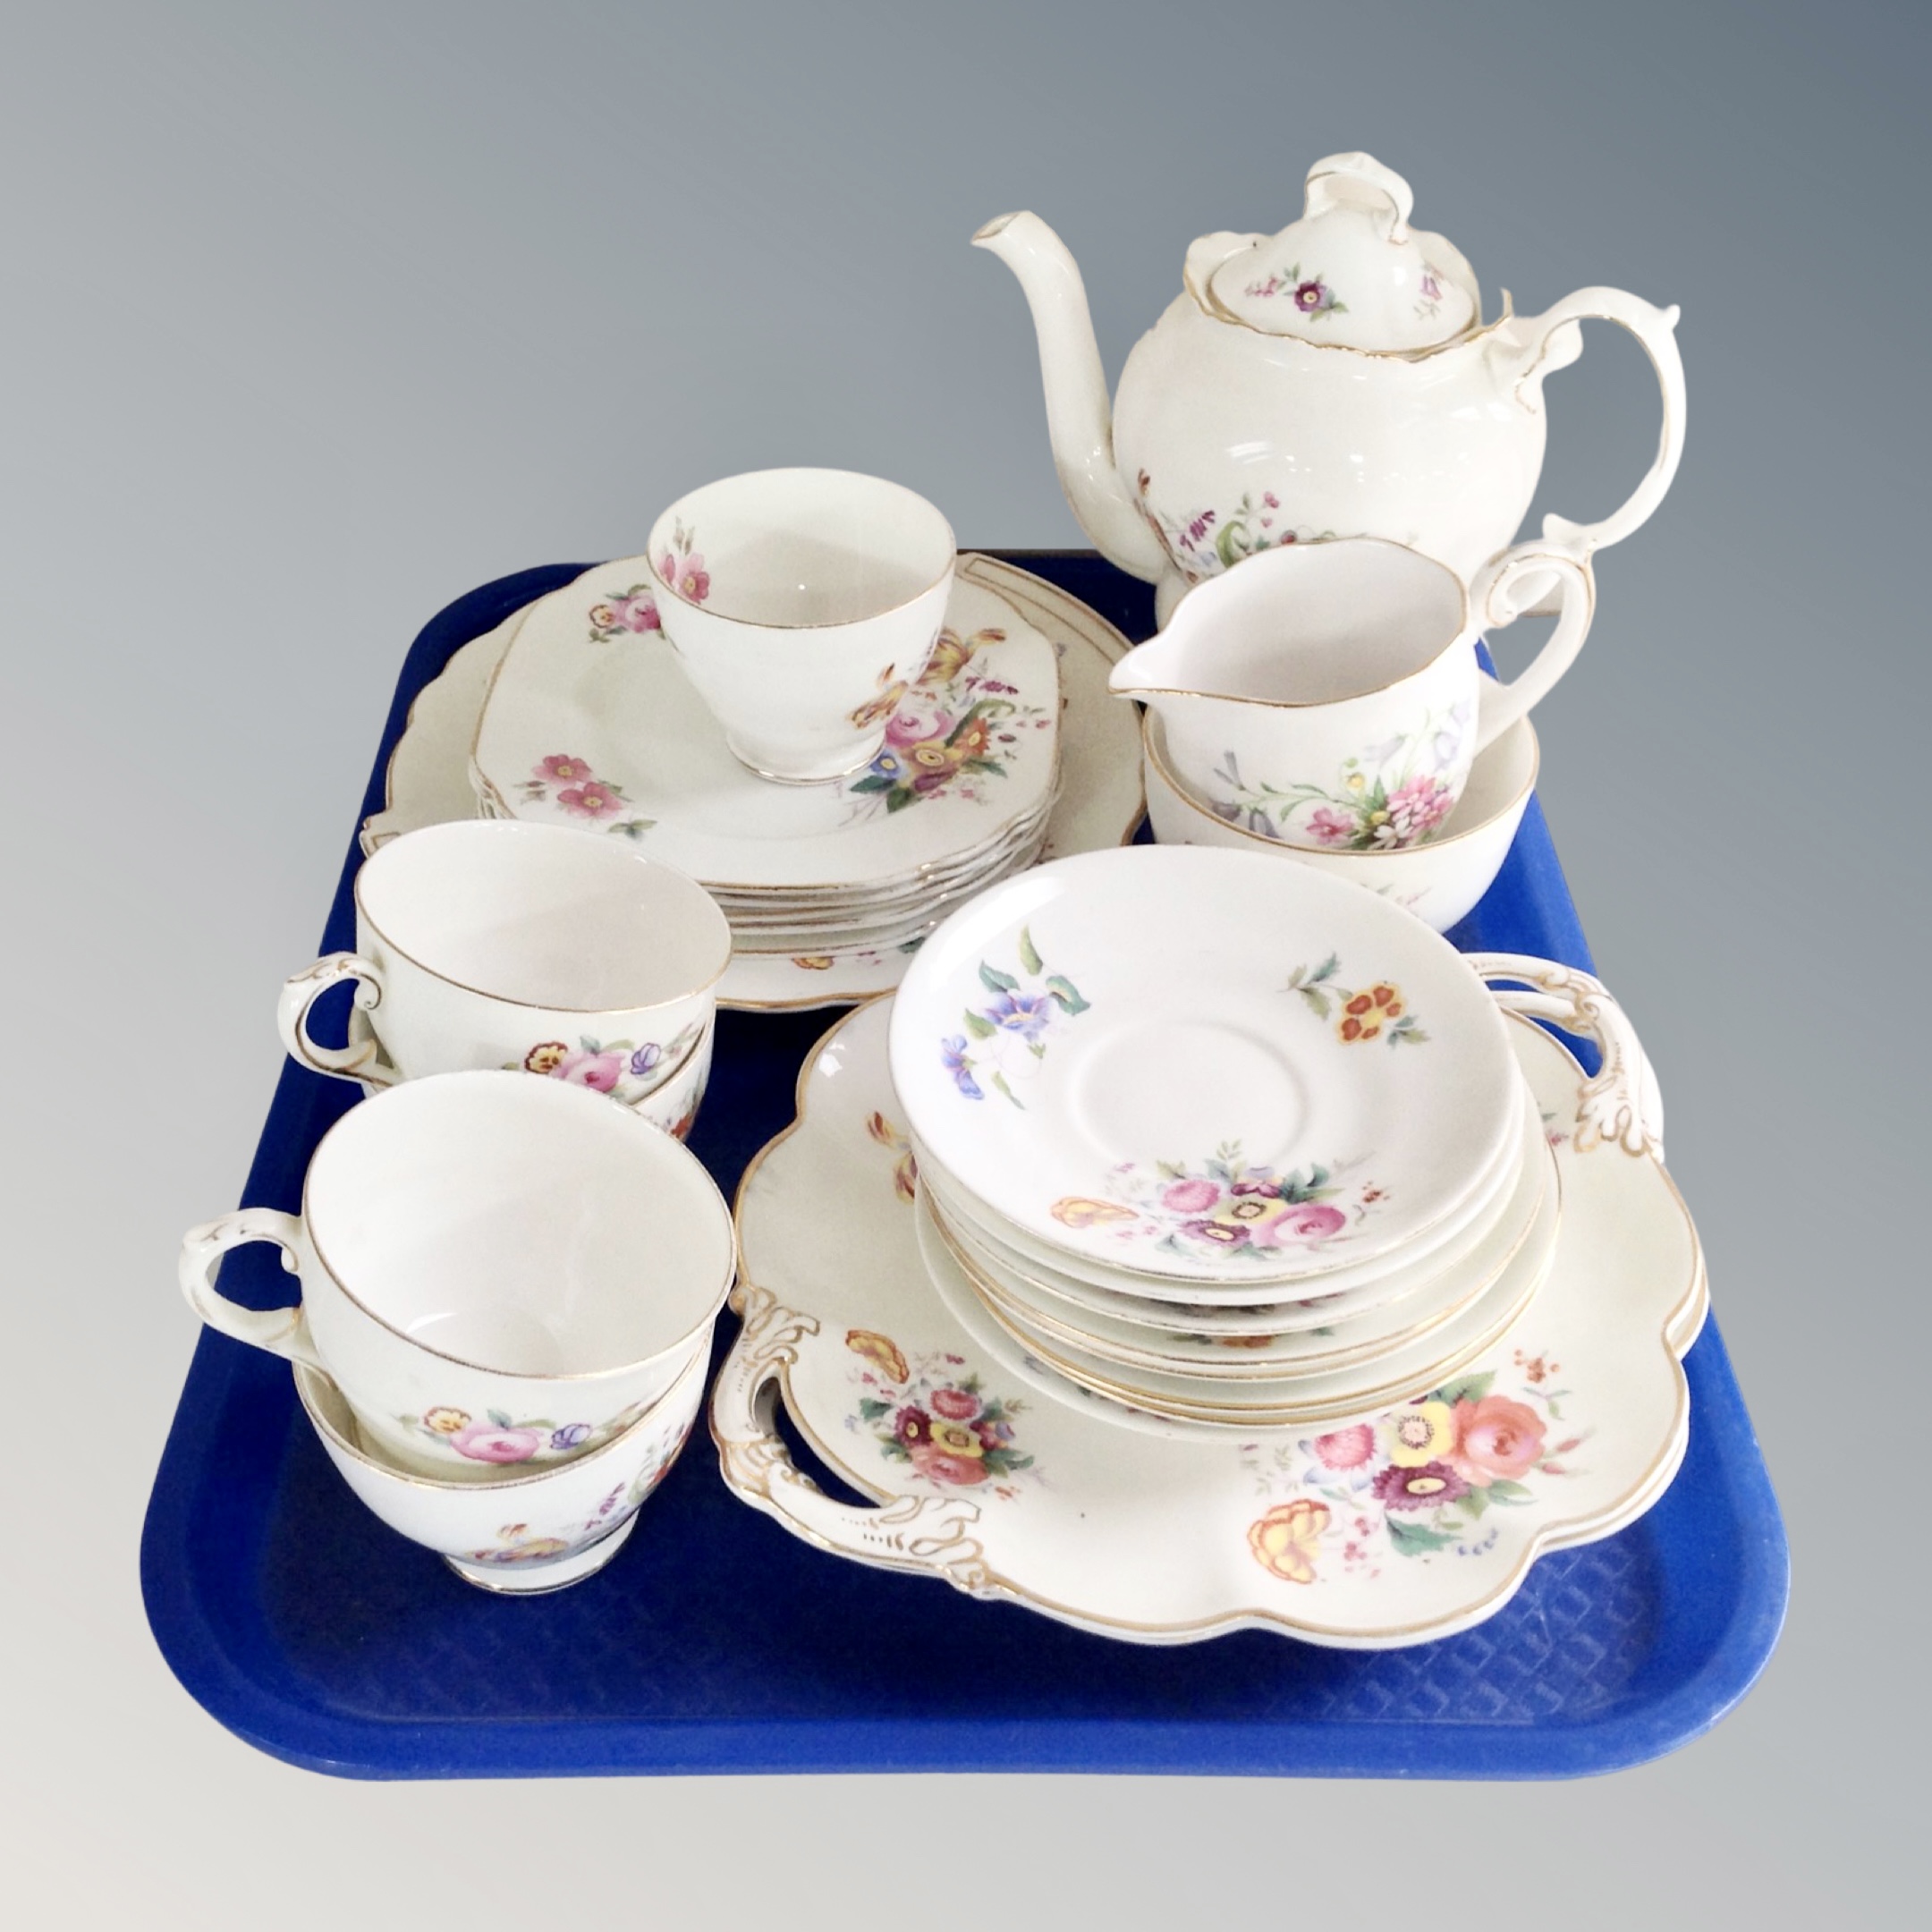 A tray of twenty-four pieces of Crescent Junetime tea china